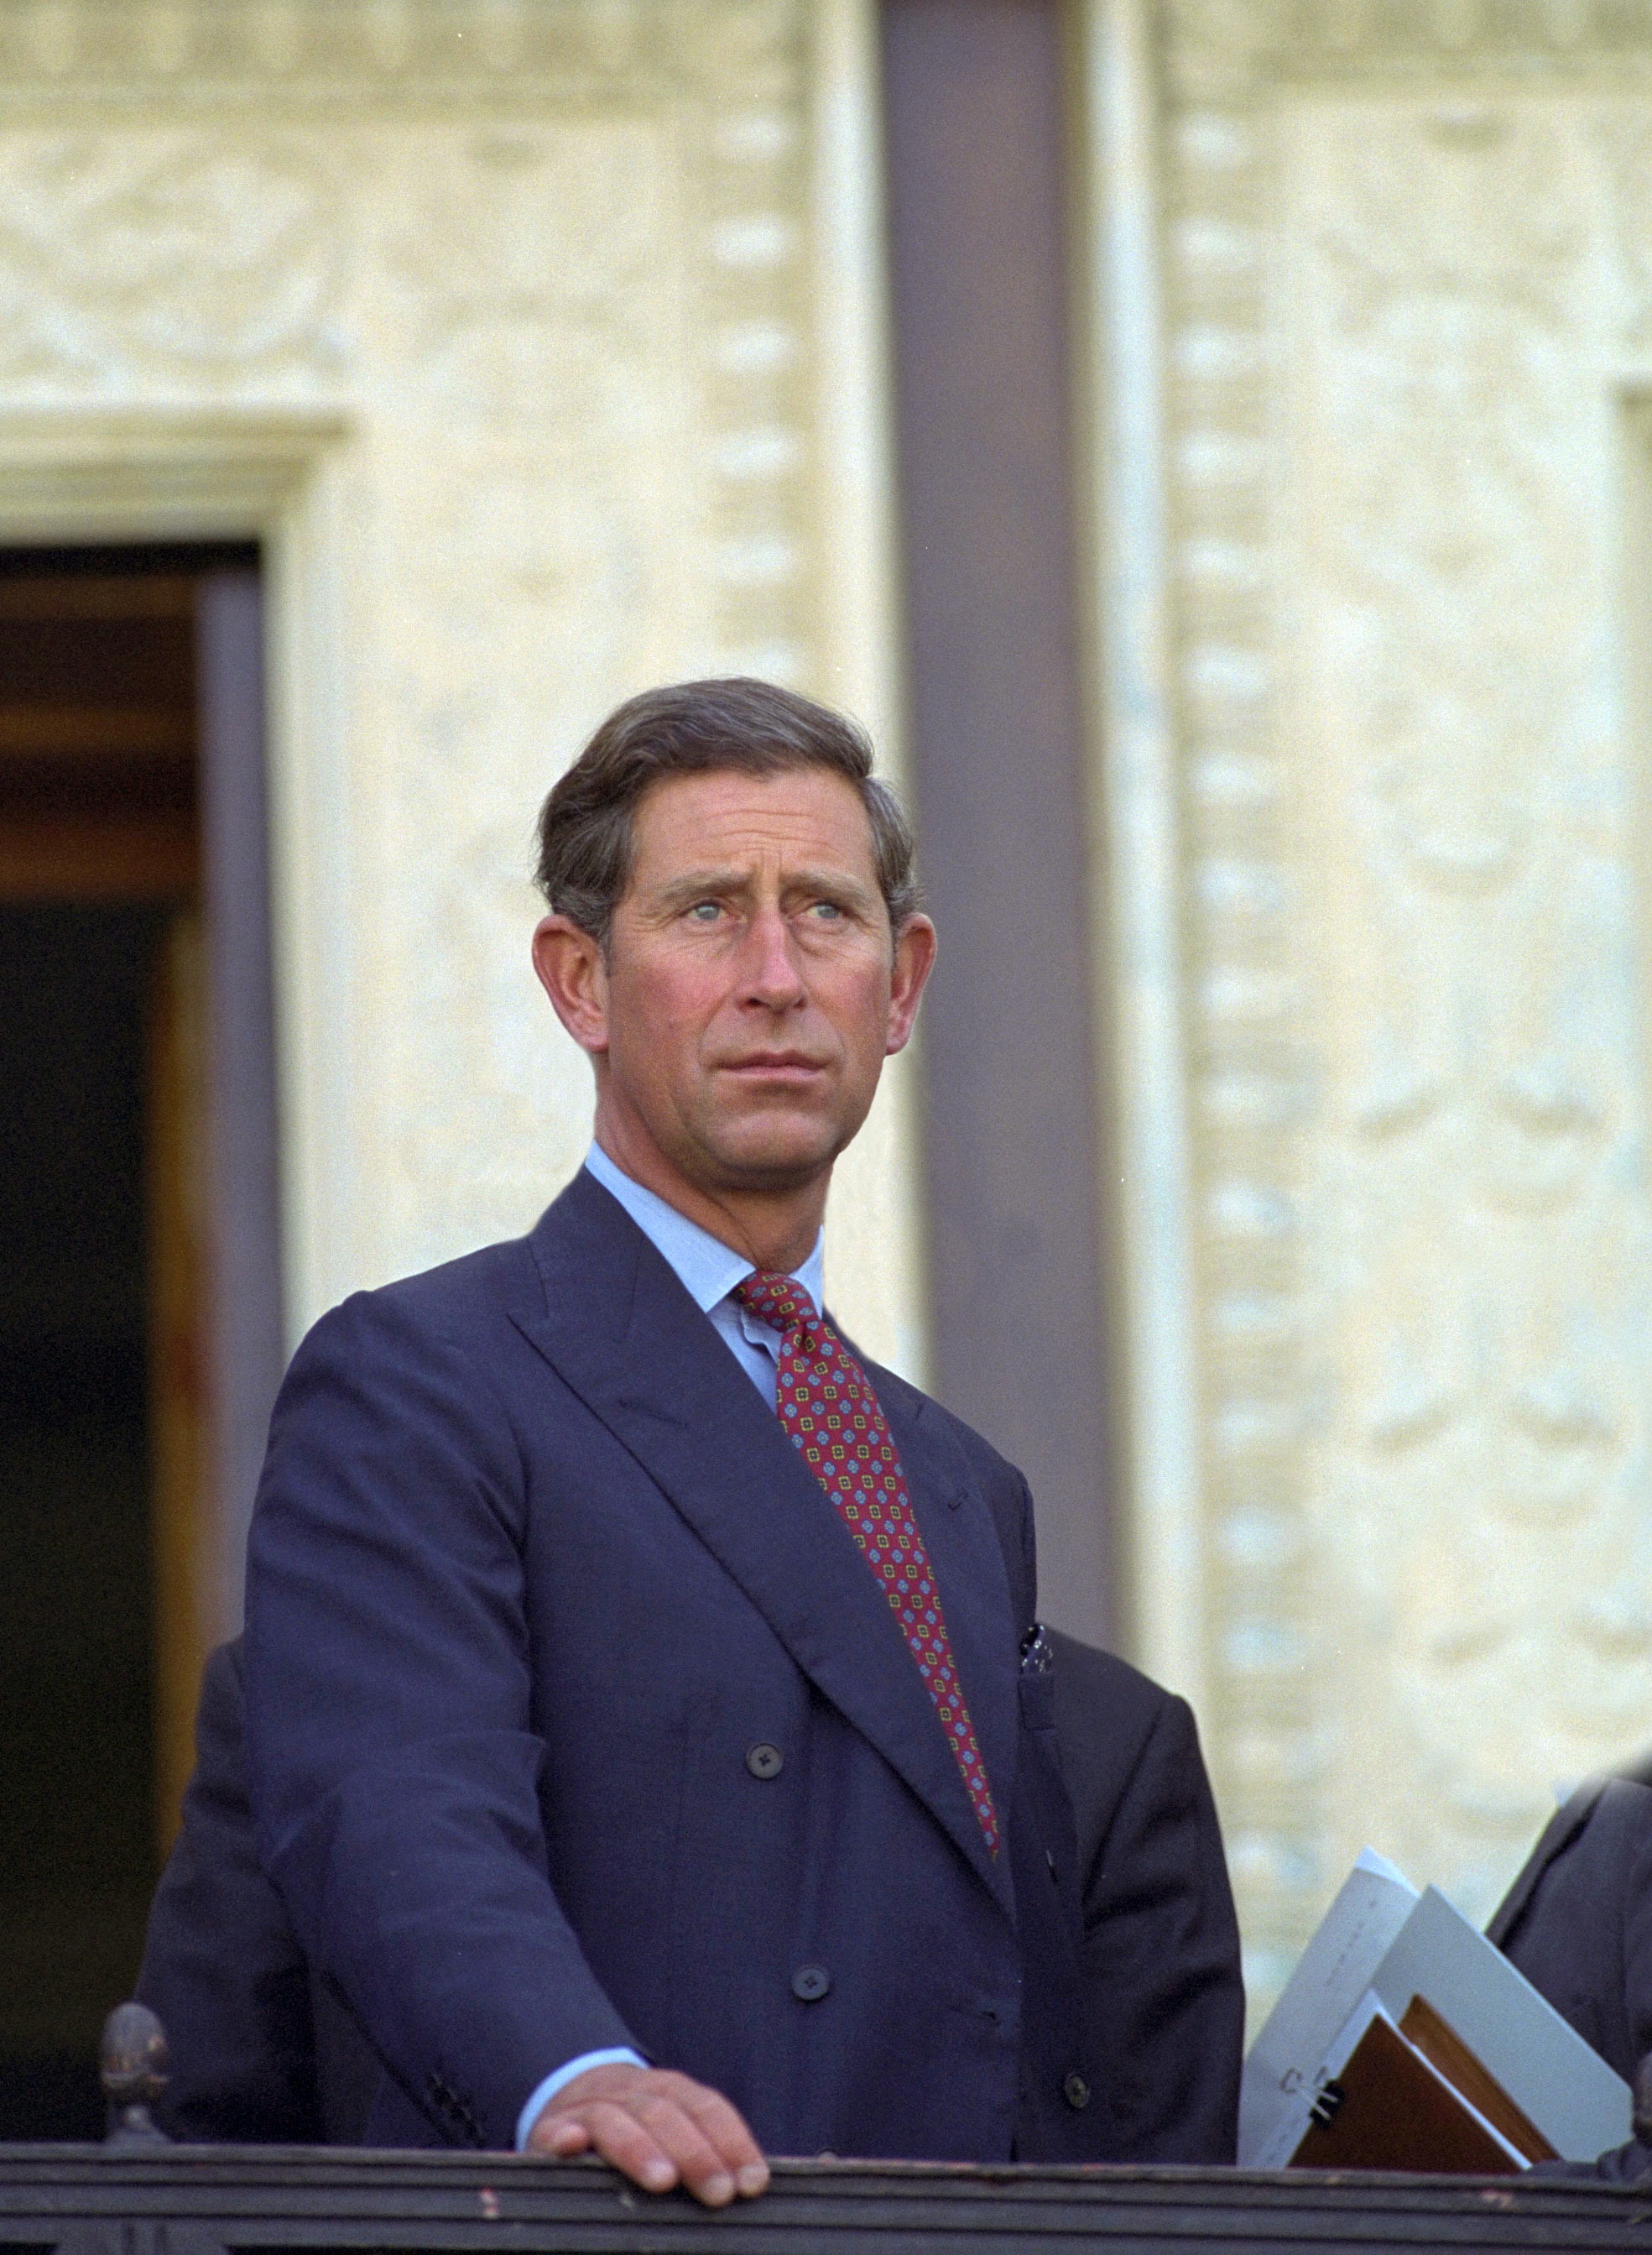 Prince Charles  Prince Charles At Schloss Glienicke in Berlin on his first official engagement after his divorce on September 2, 1996 | Source: Getty Images